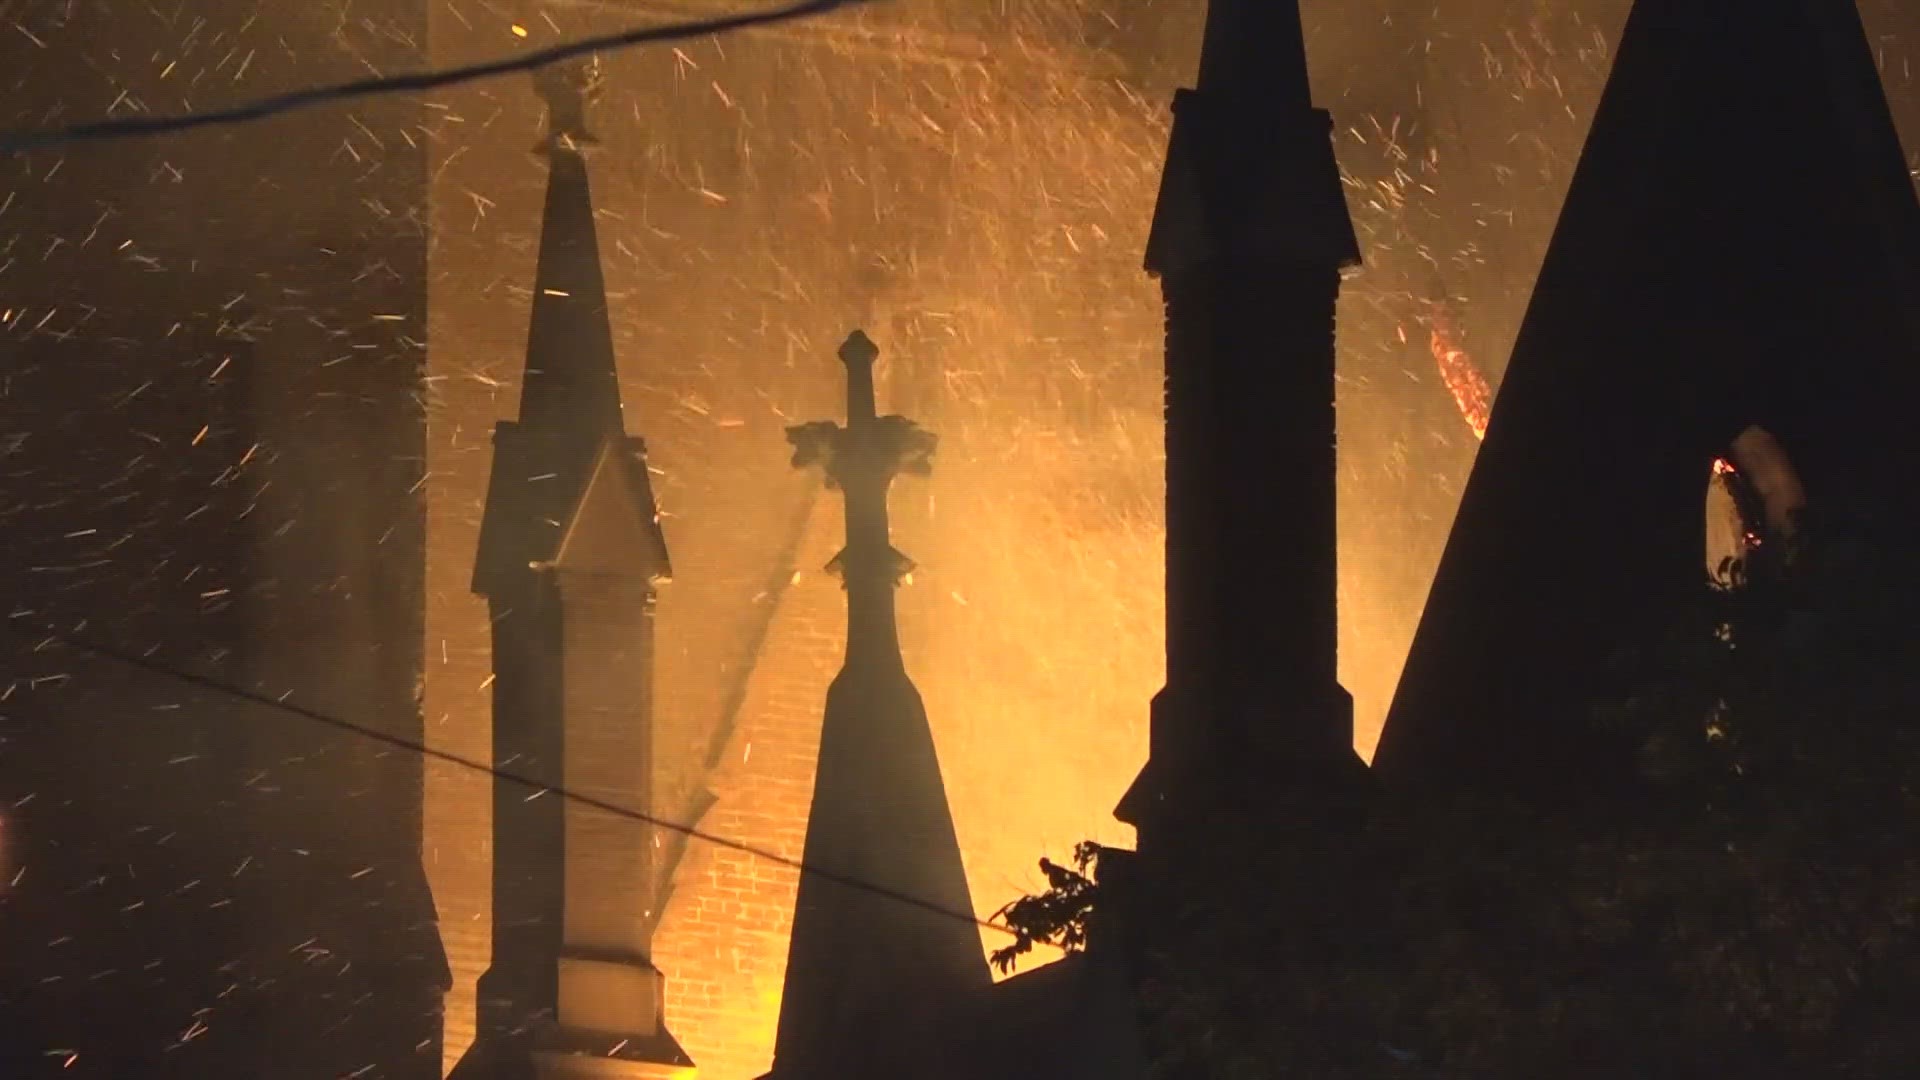 Massive fire destroys St. Louis skate park inside a former church. Firefighters battled heat while fighting massive flames Wednesday night into Thursday morning.